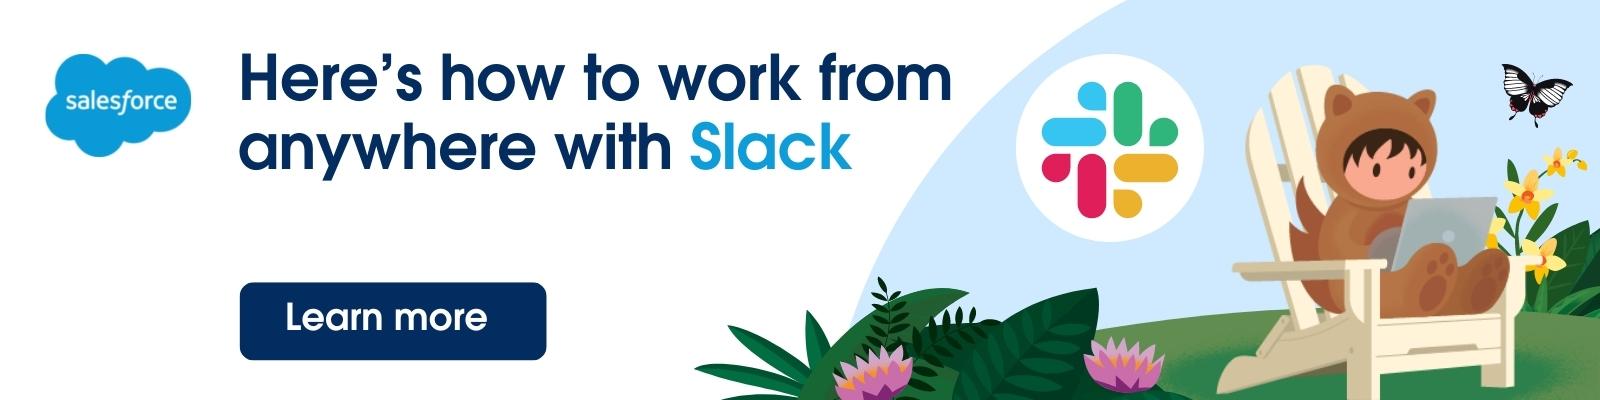 Learn more about Slack and Salesforce.